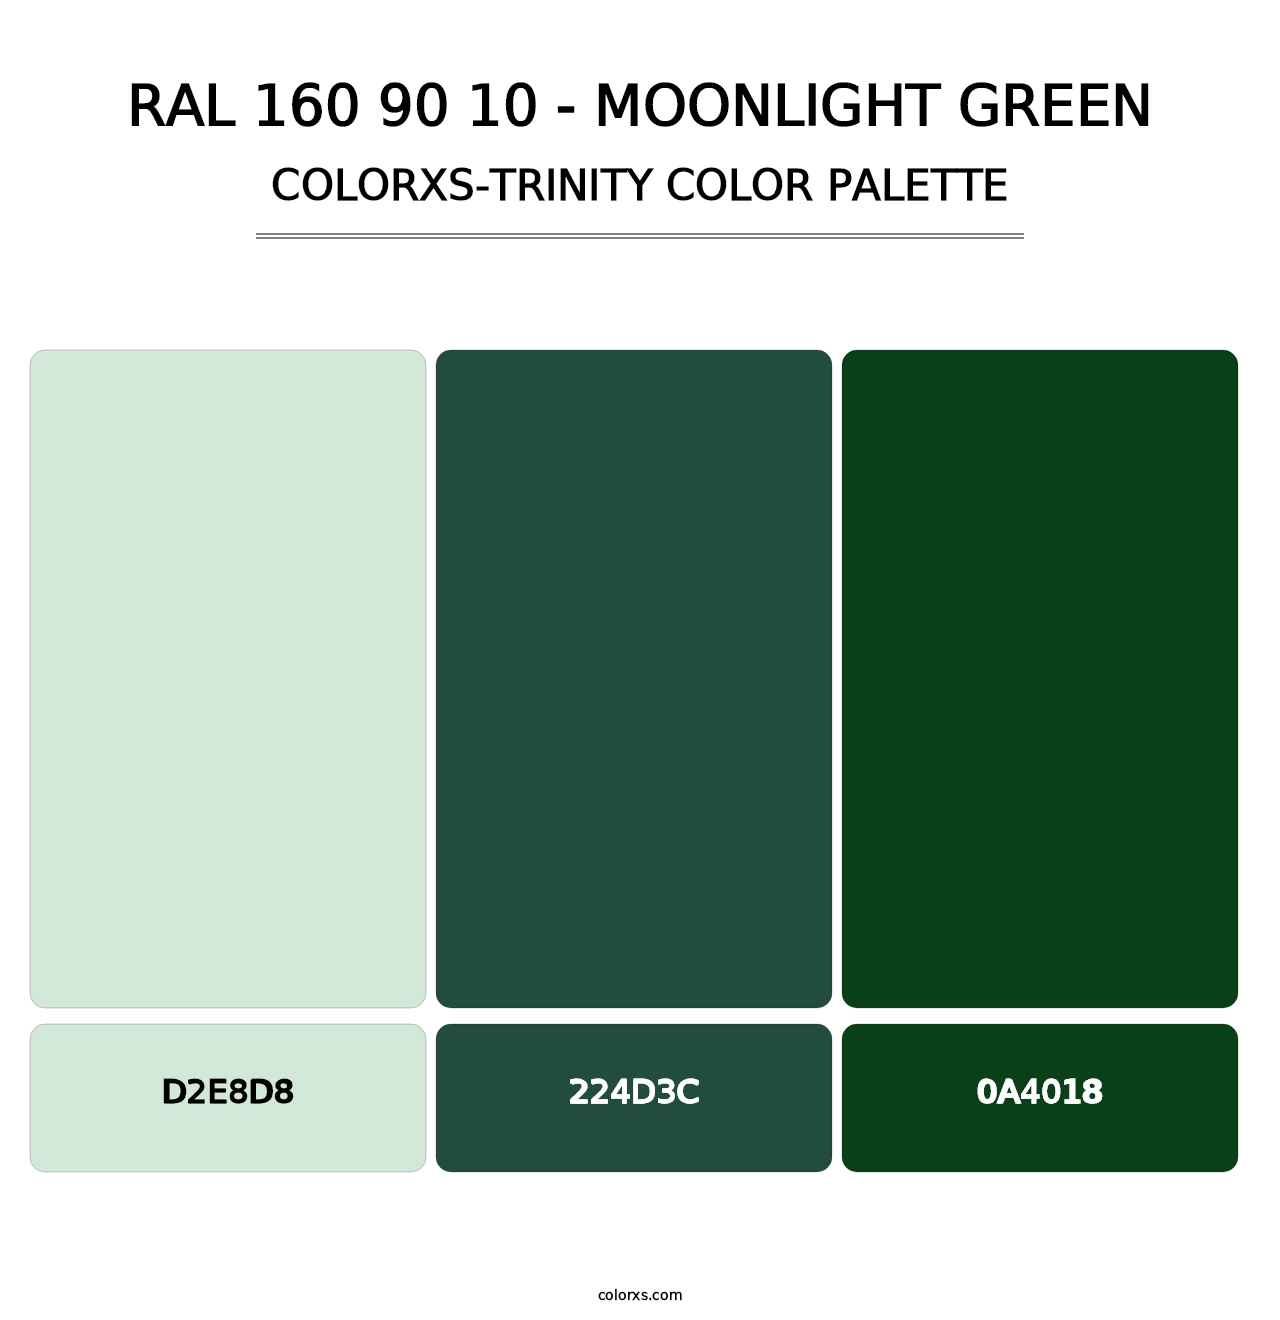 RAL 160 90 10 - Moonlight Green - Colorxs Trinity Palette